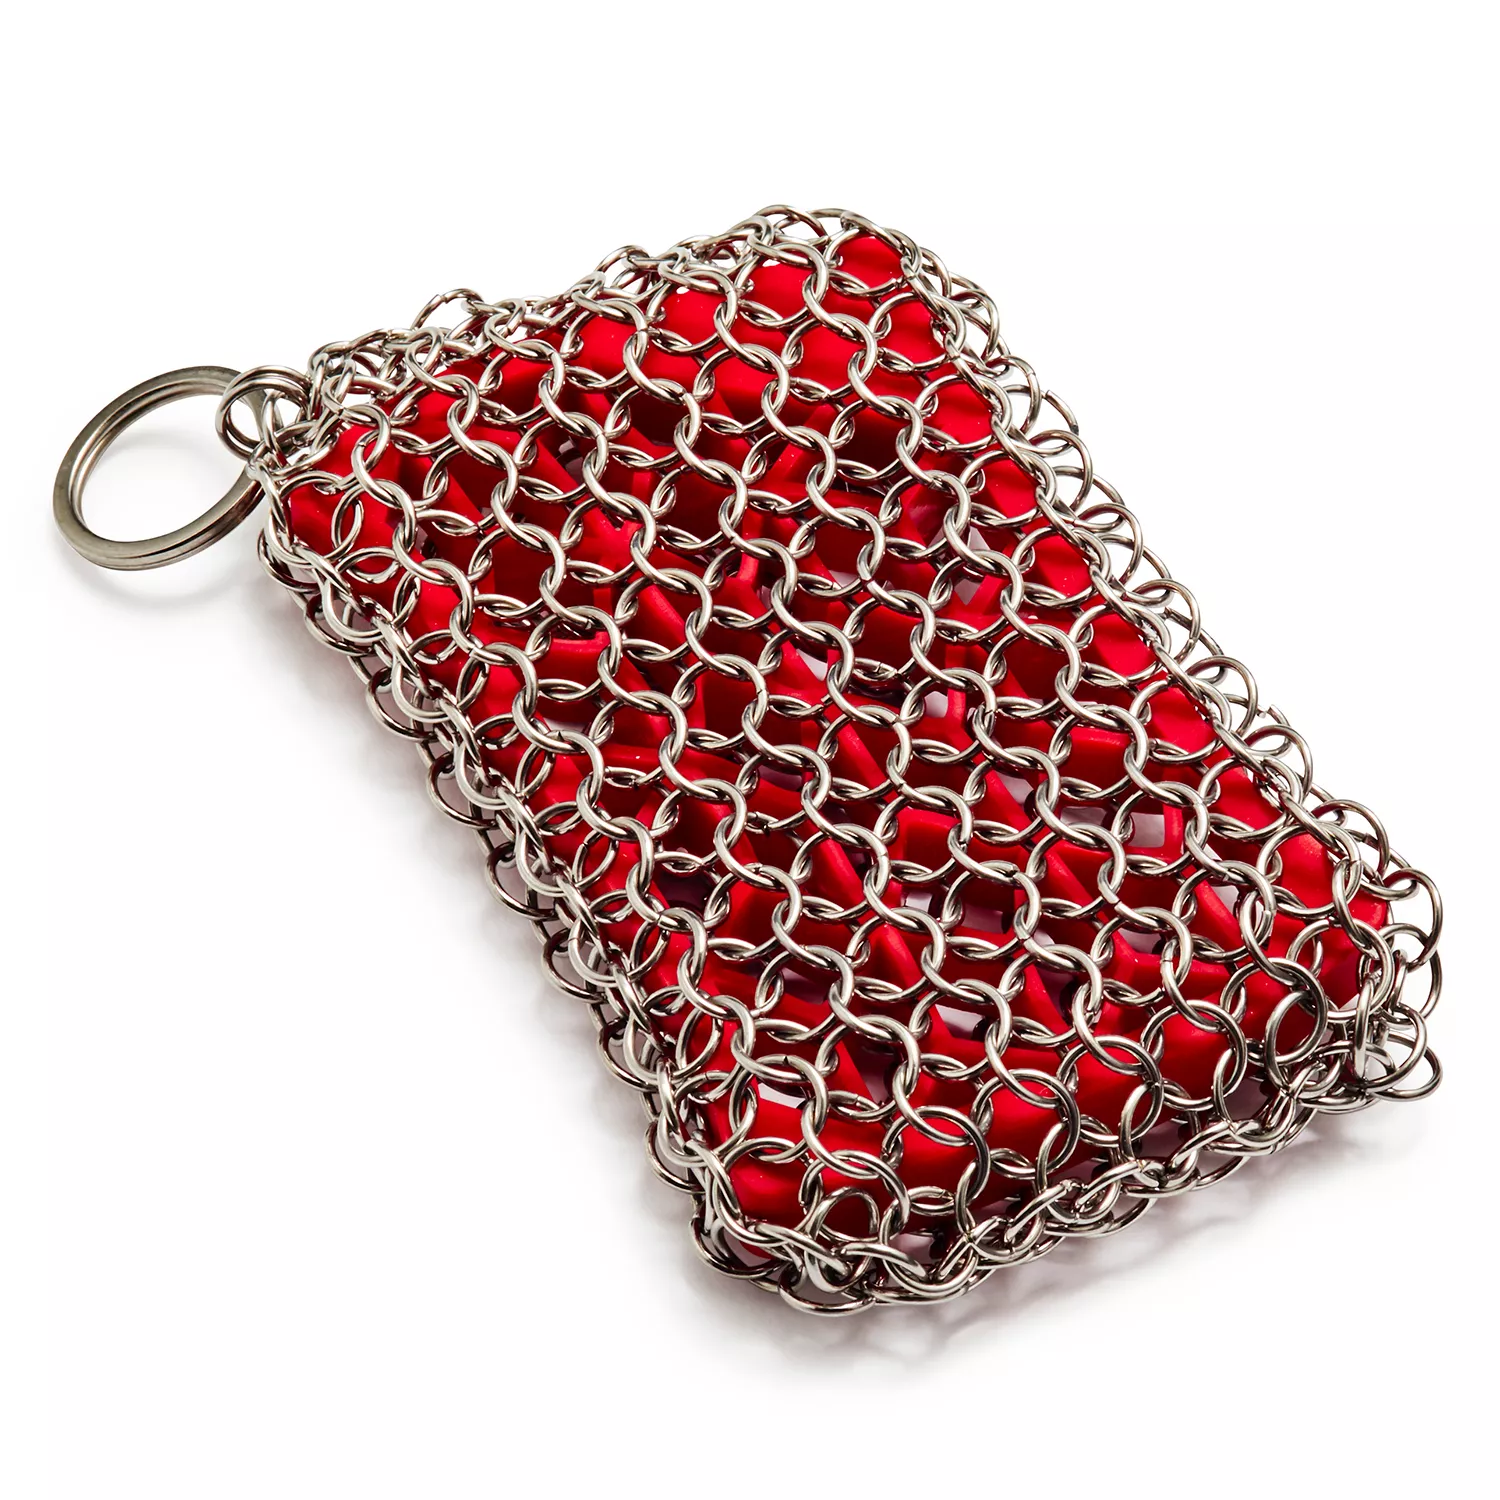 Lodge Chainmail Scrubbing Pad, Red